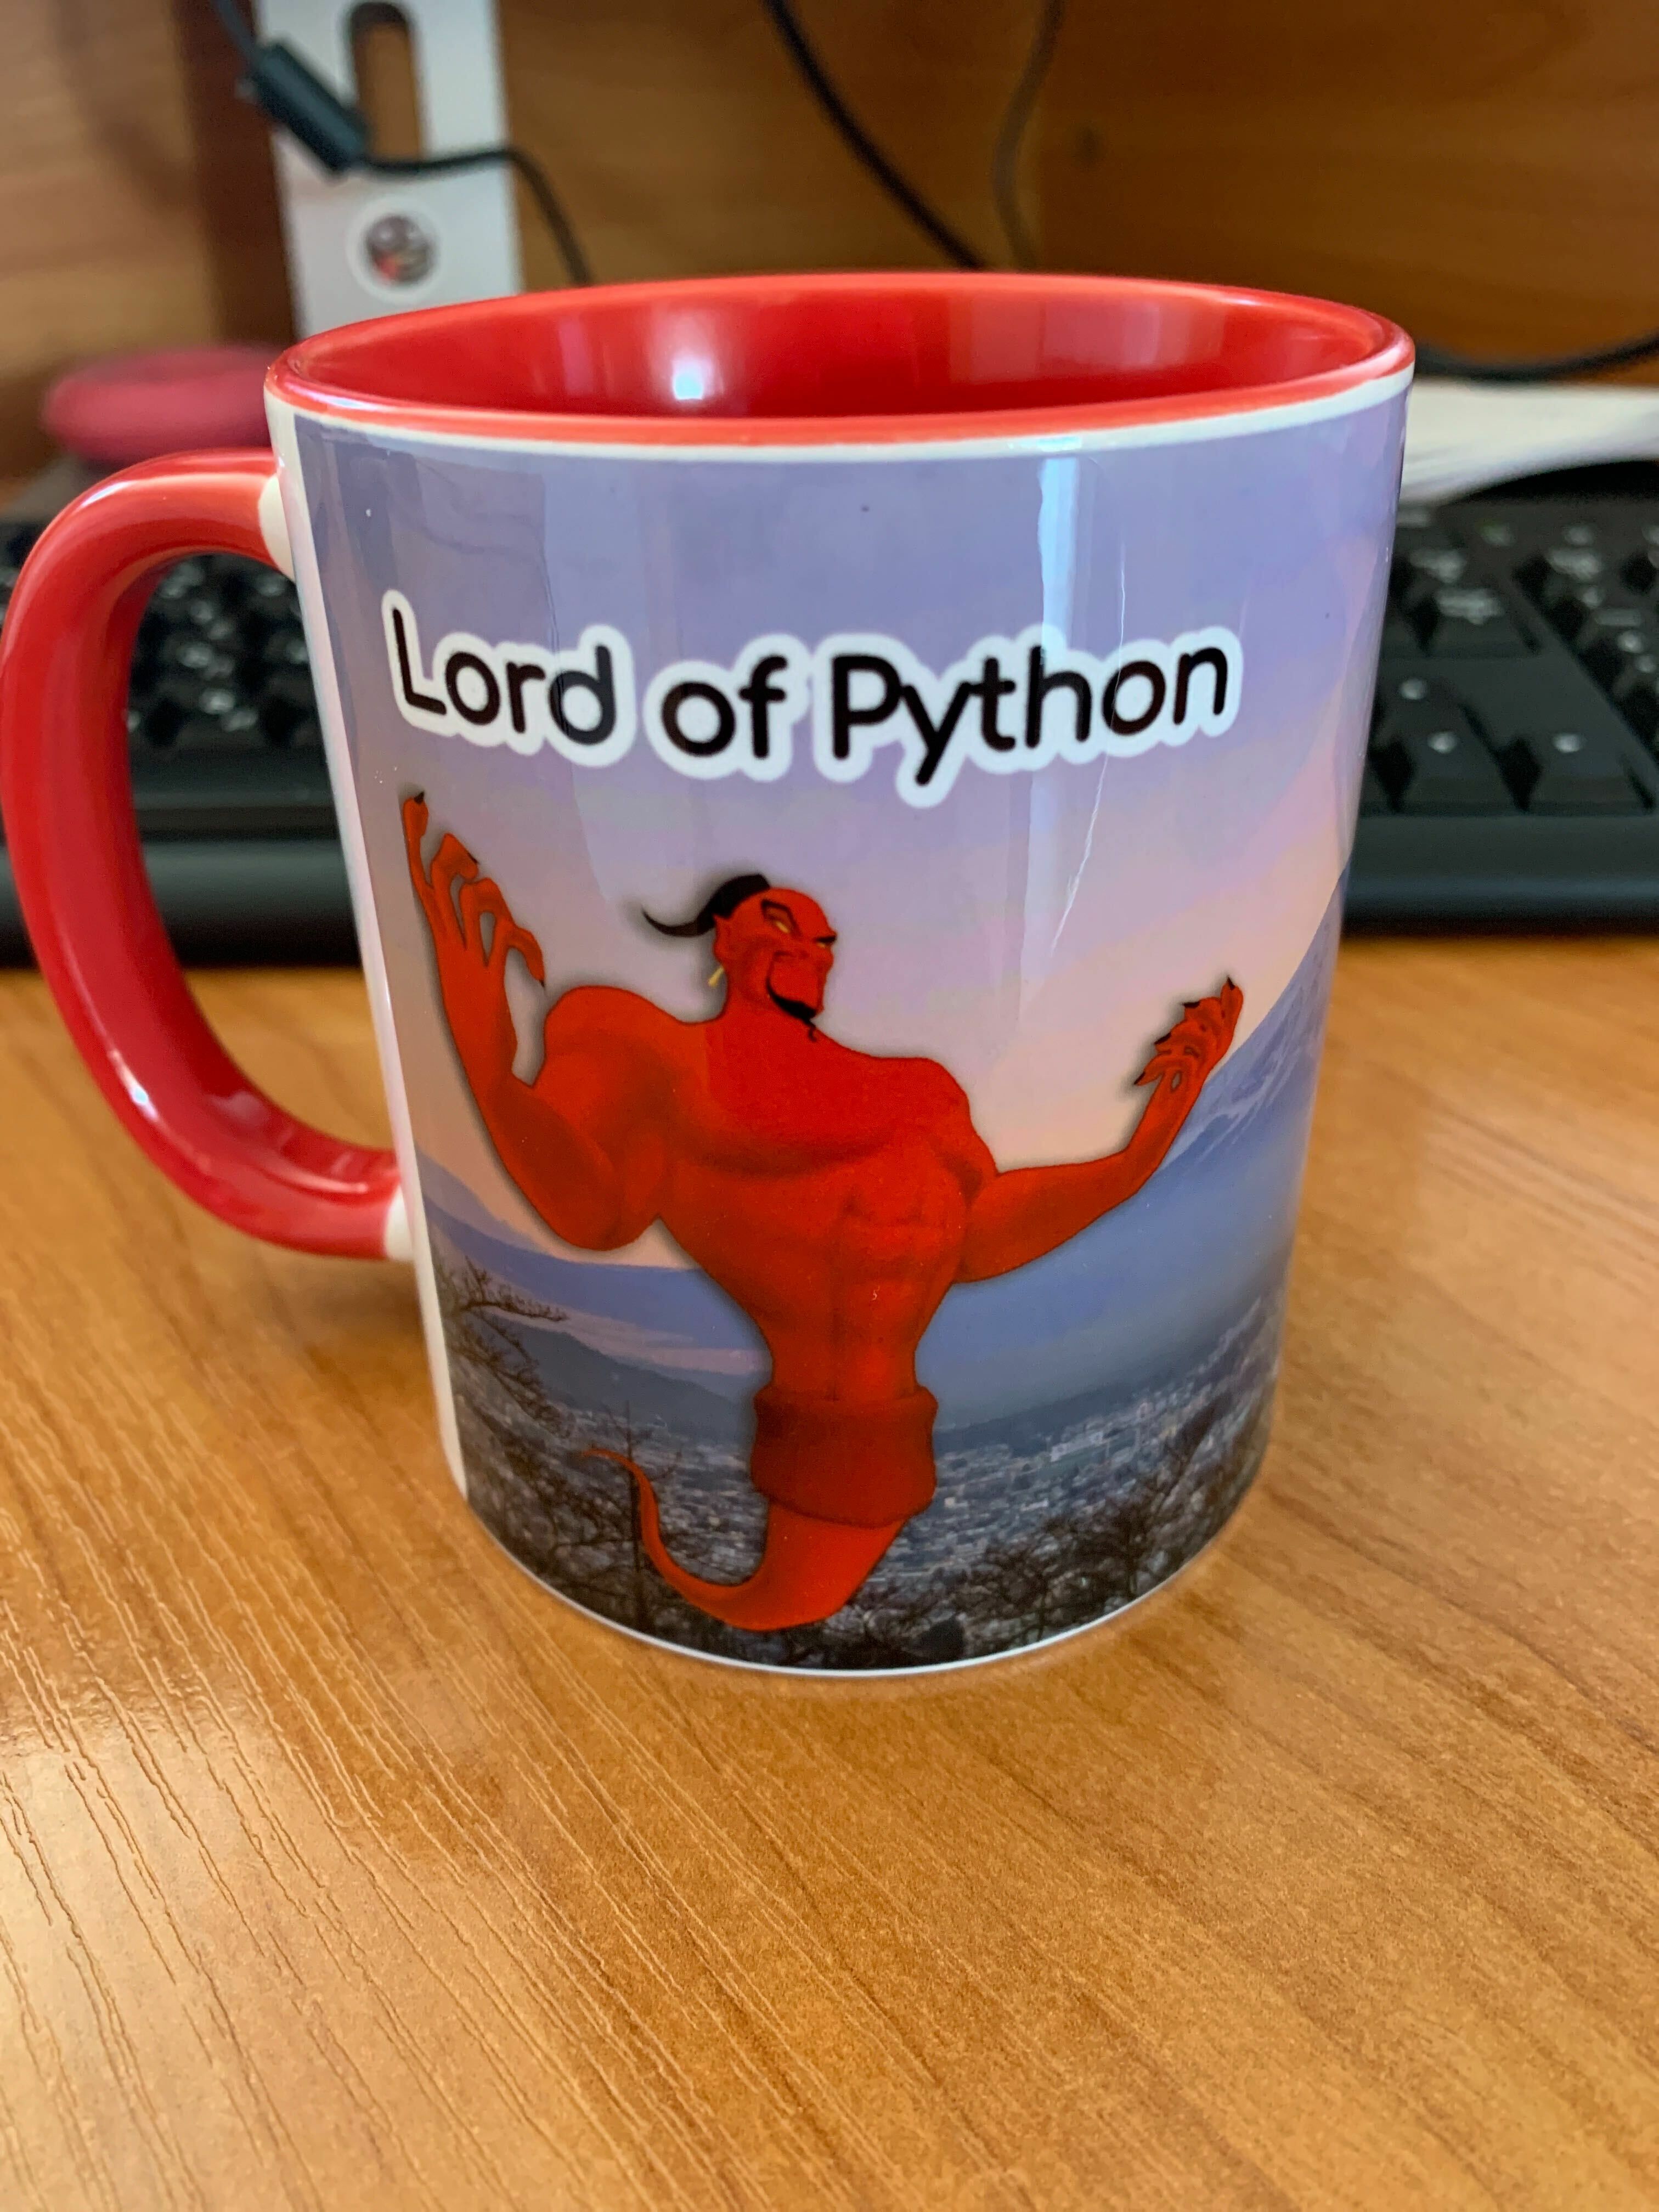 How about Python?